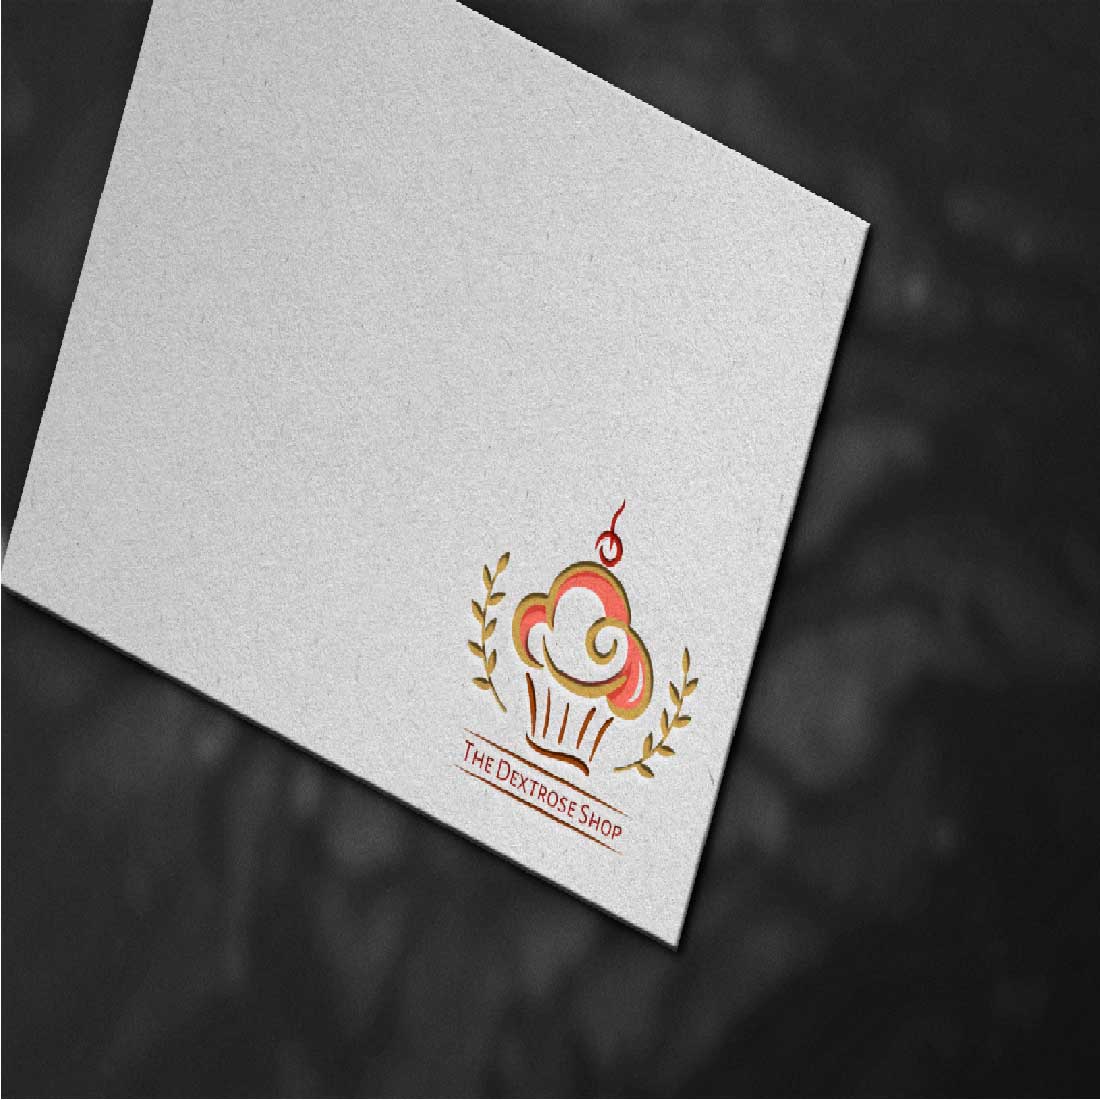 Fast food & Bakers logo design ready to Print and Social media Upload No copyright